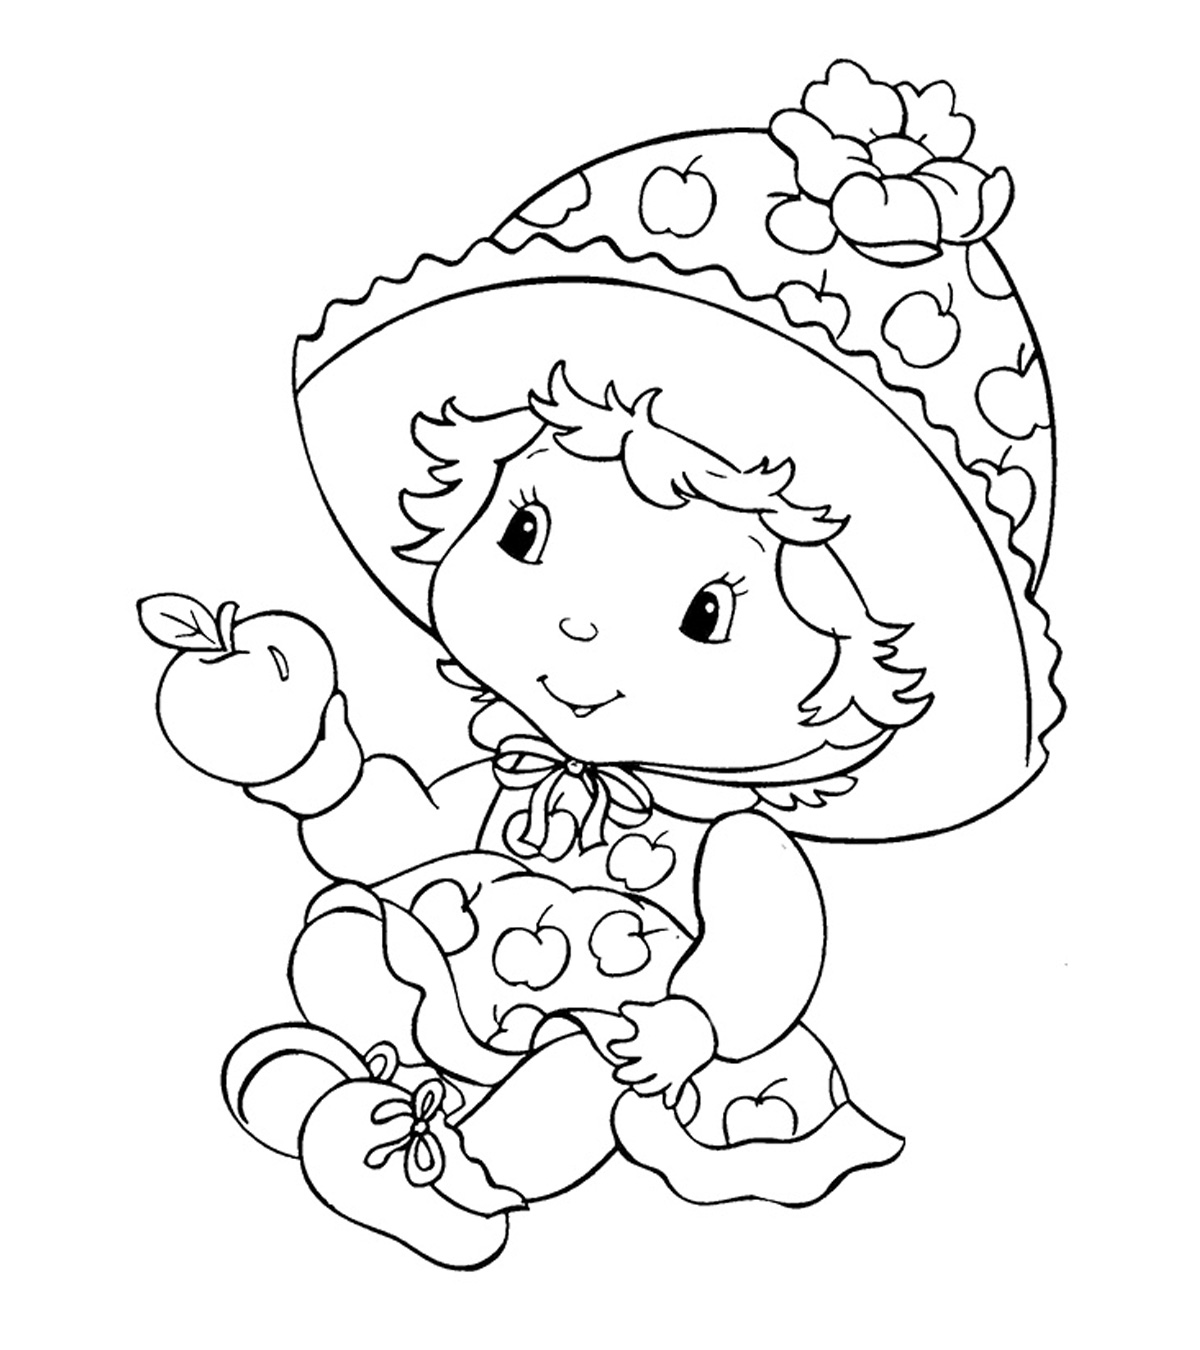 Snacks Coloring Pages MomJunction